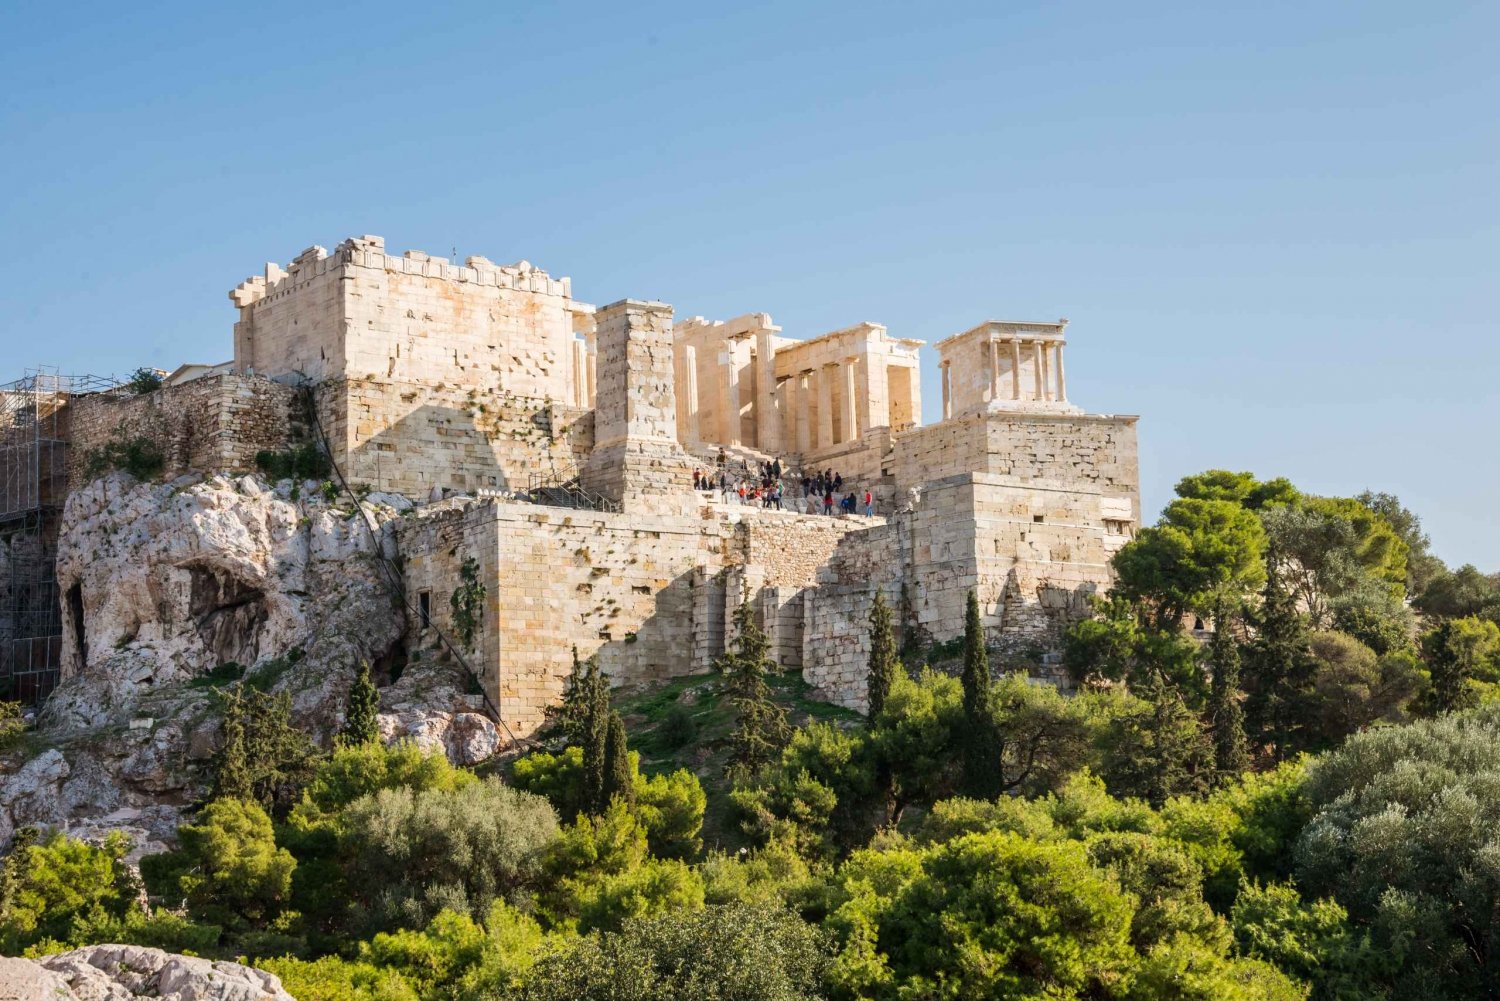 Athens City and Seaside: Yellow Hop-on Hop-off Bus Tour